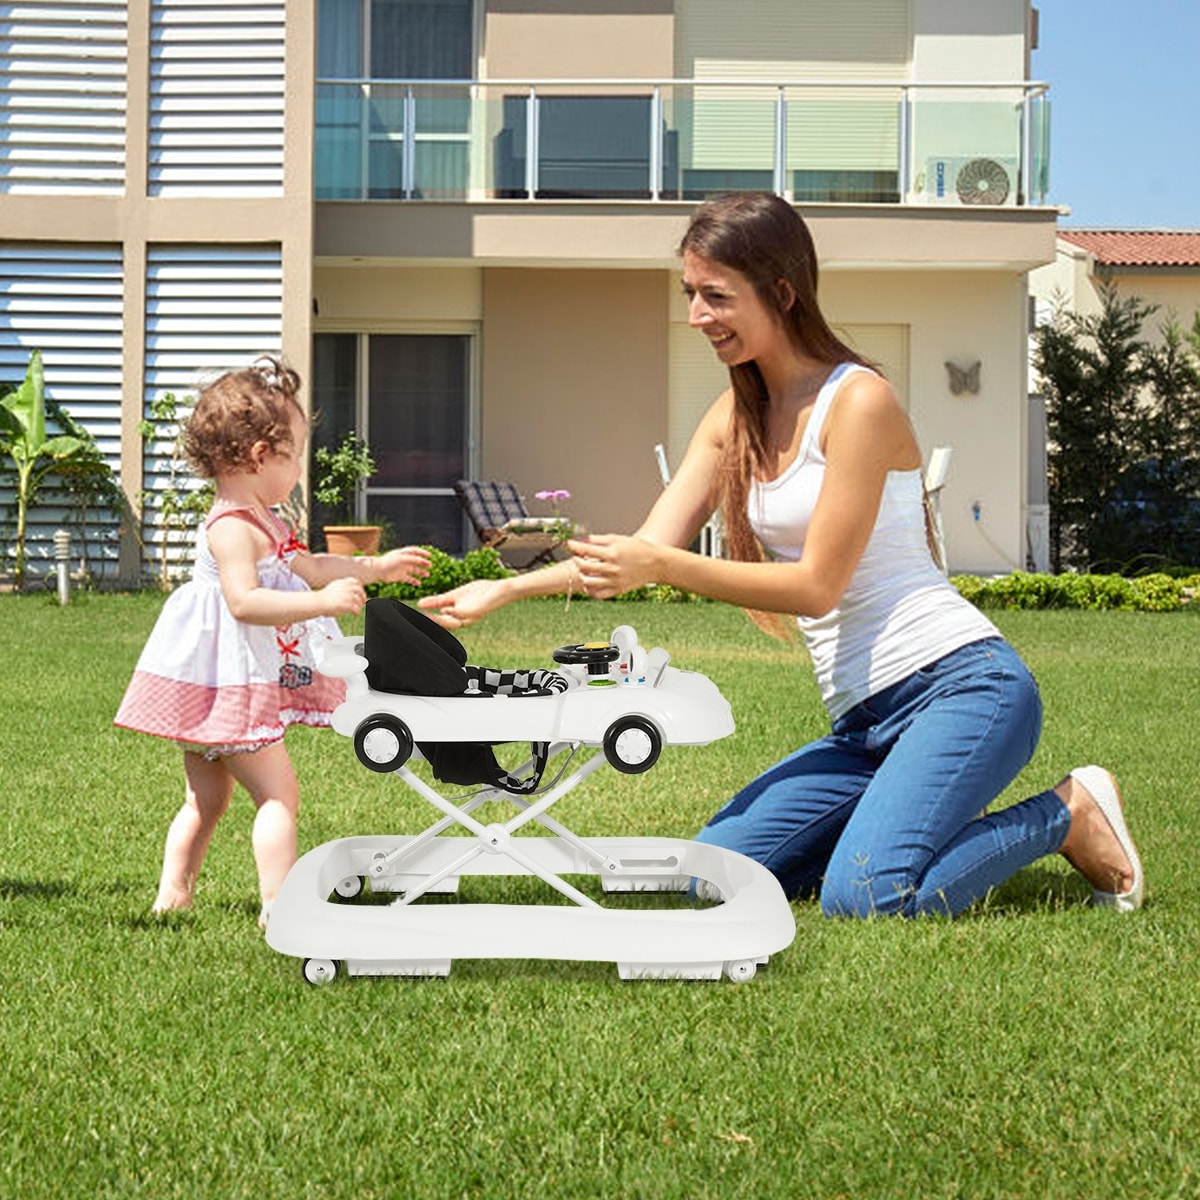 https://ak1.ostkcdn.com/images/products/is/images/direct/0bc3fbe18f203d0f182a886fd5bcc2207ef0025c/Costway-2-in-1-Foldable-Baby-Walker-w--Adjustable-Heights-%26-Music.jpg